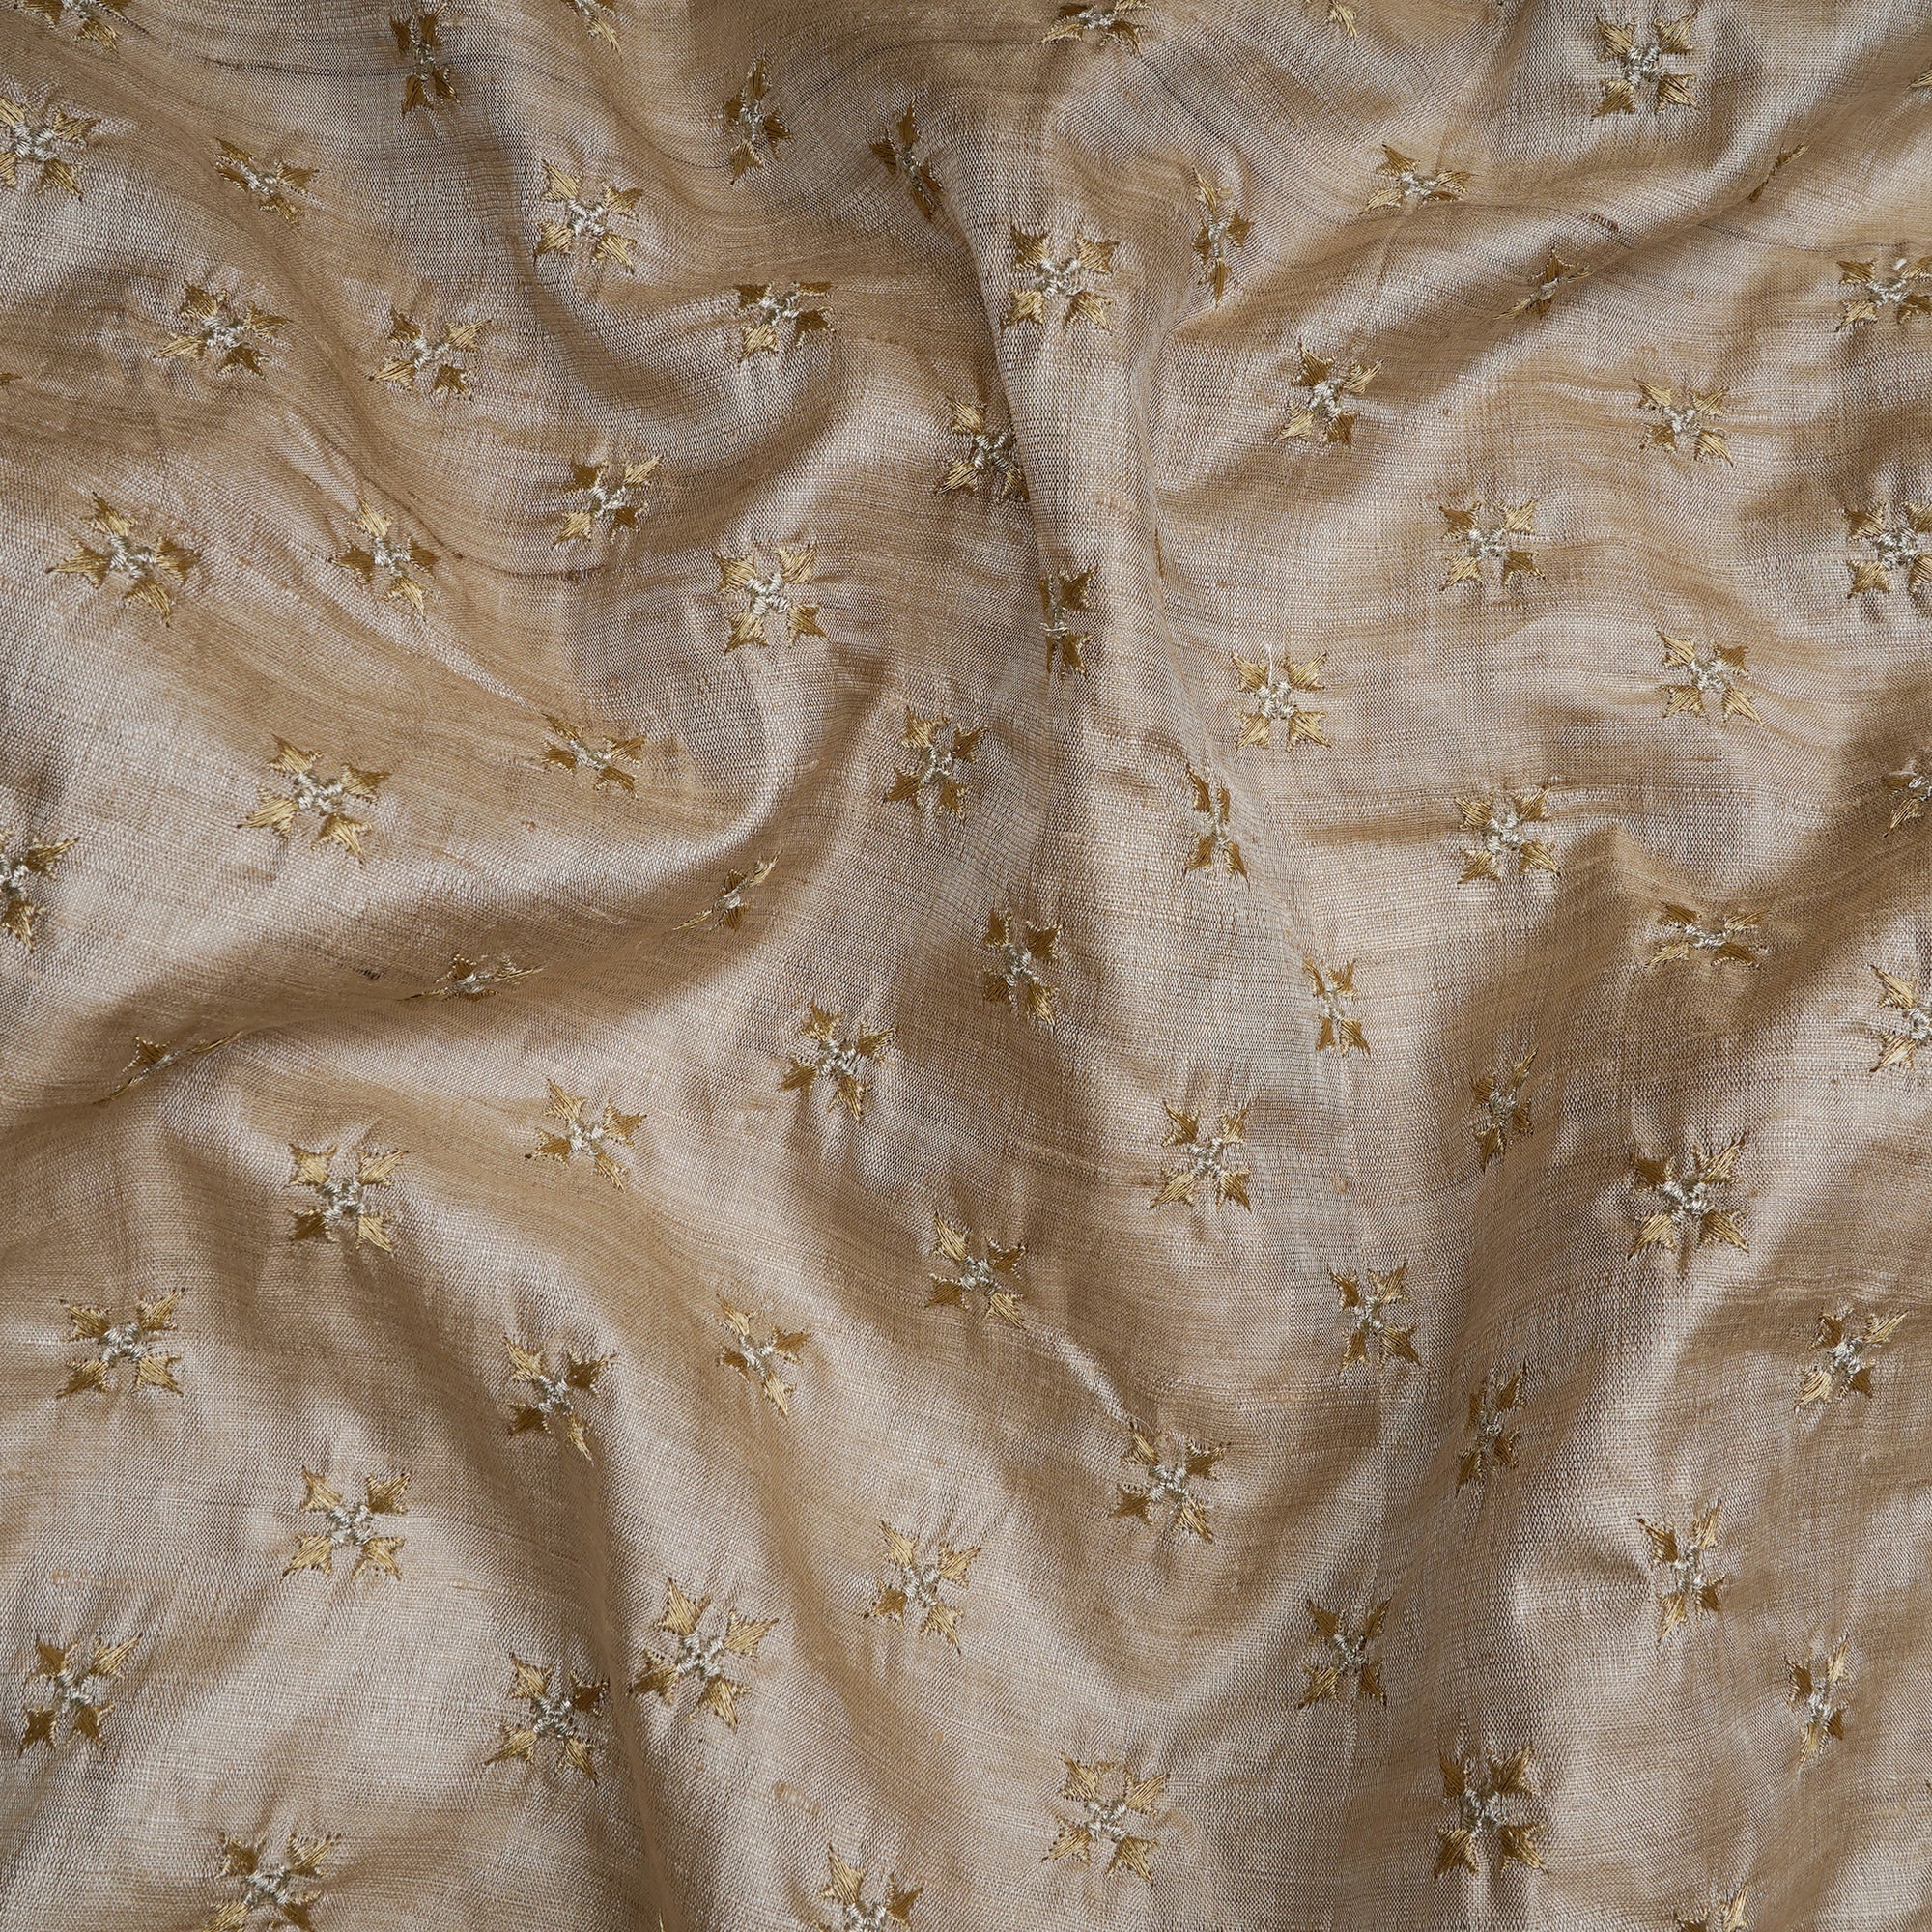 Turtledove Booti Patter Thread Embroidered Tusser Silk Fabric